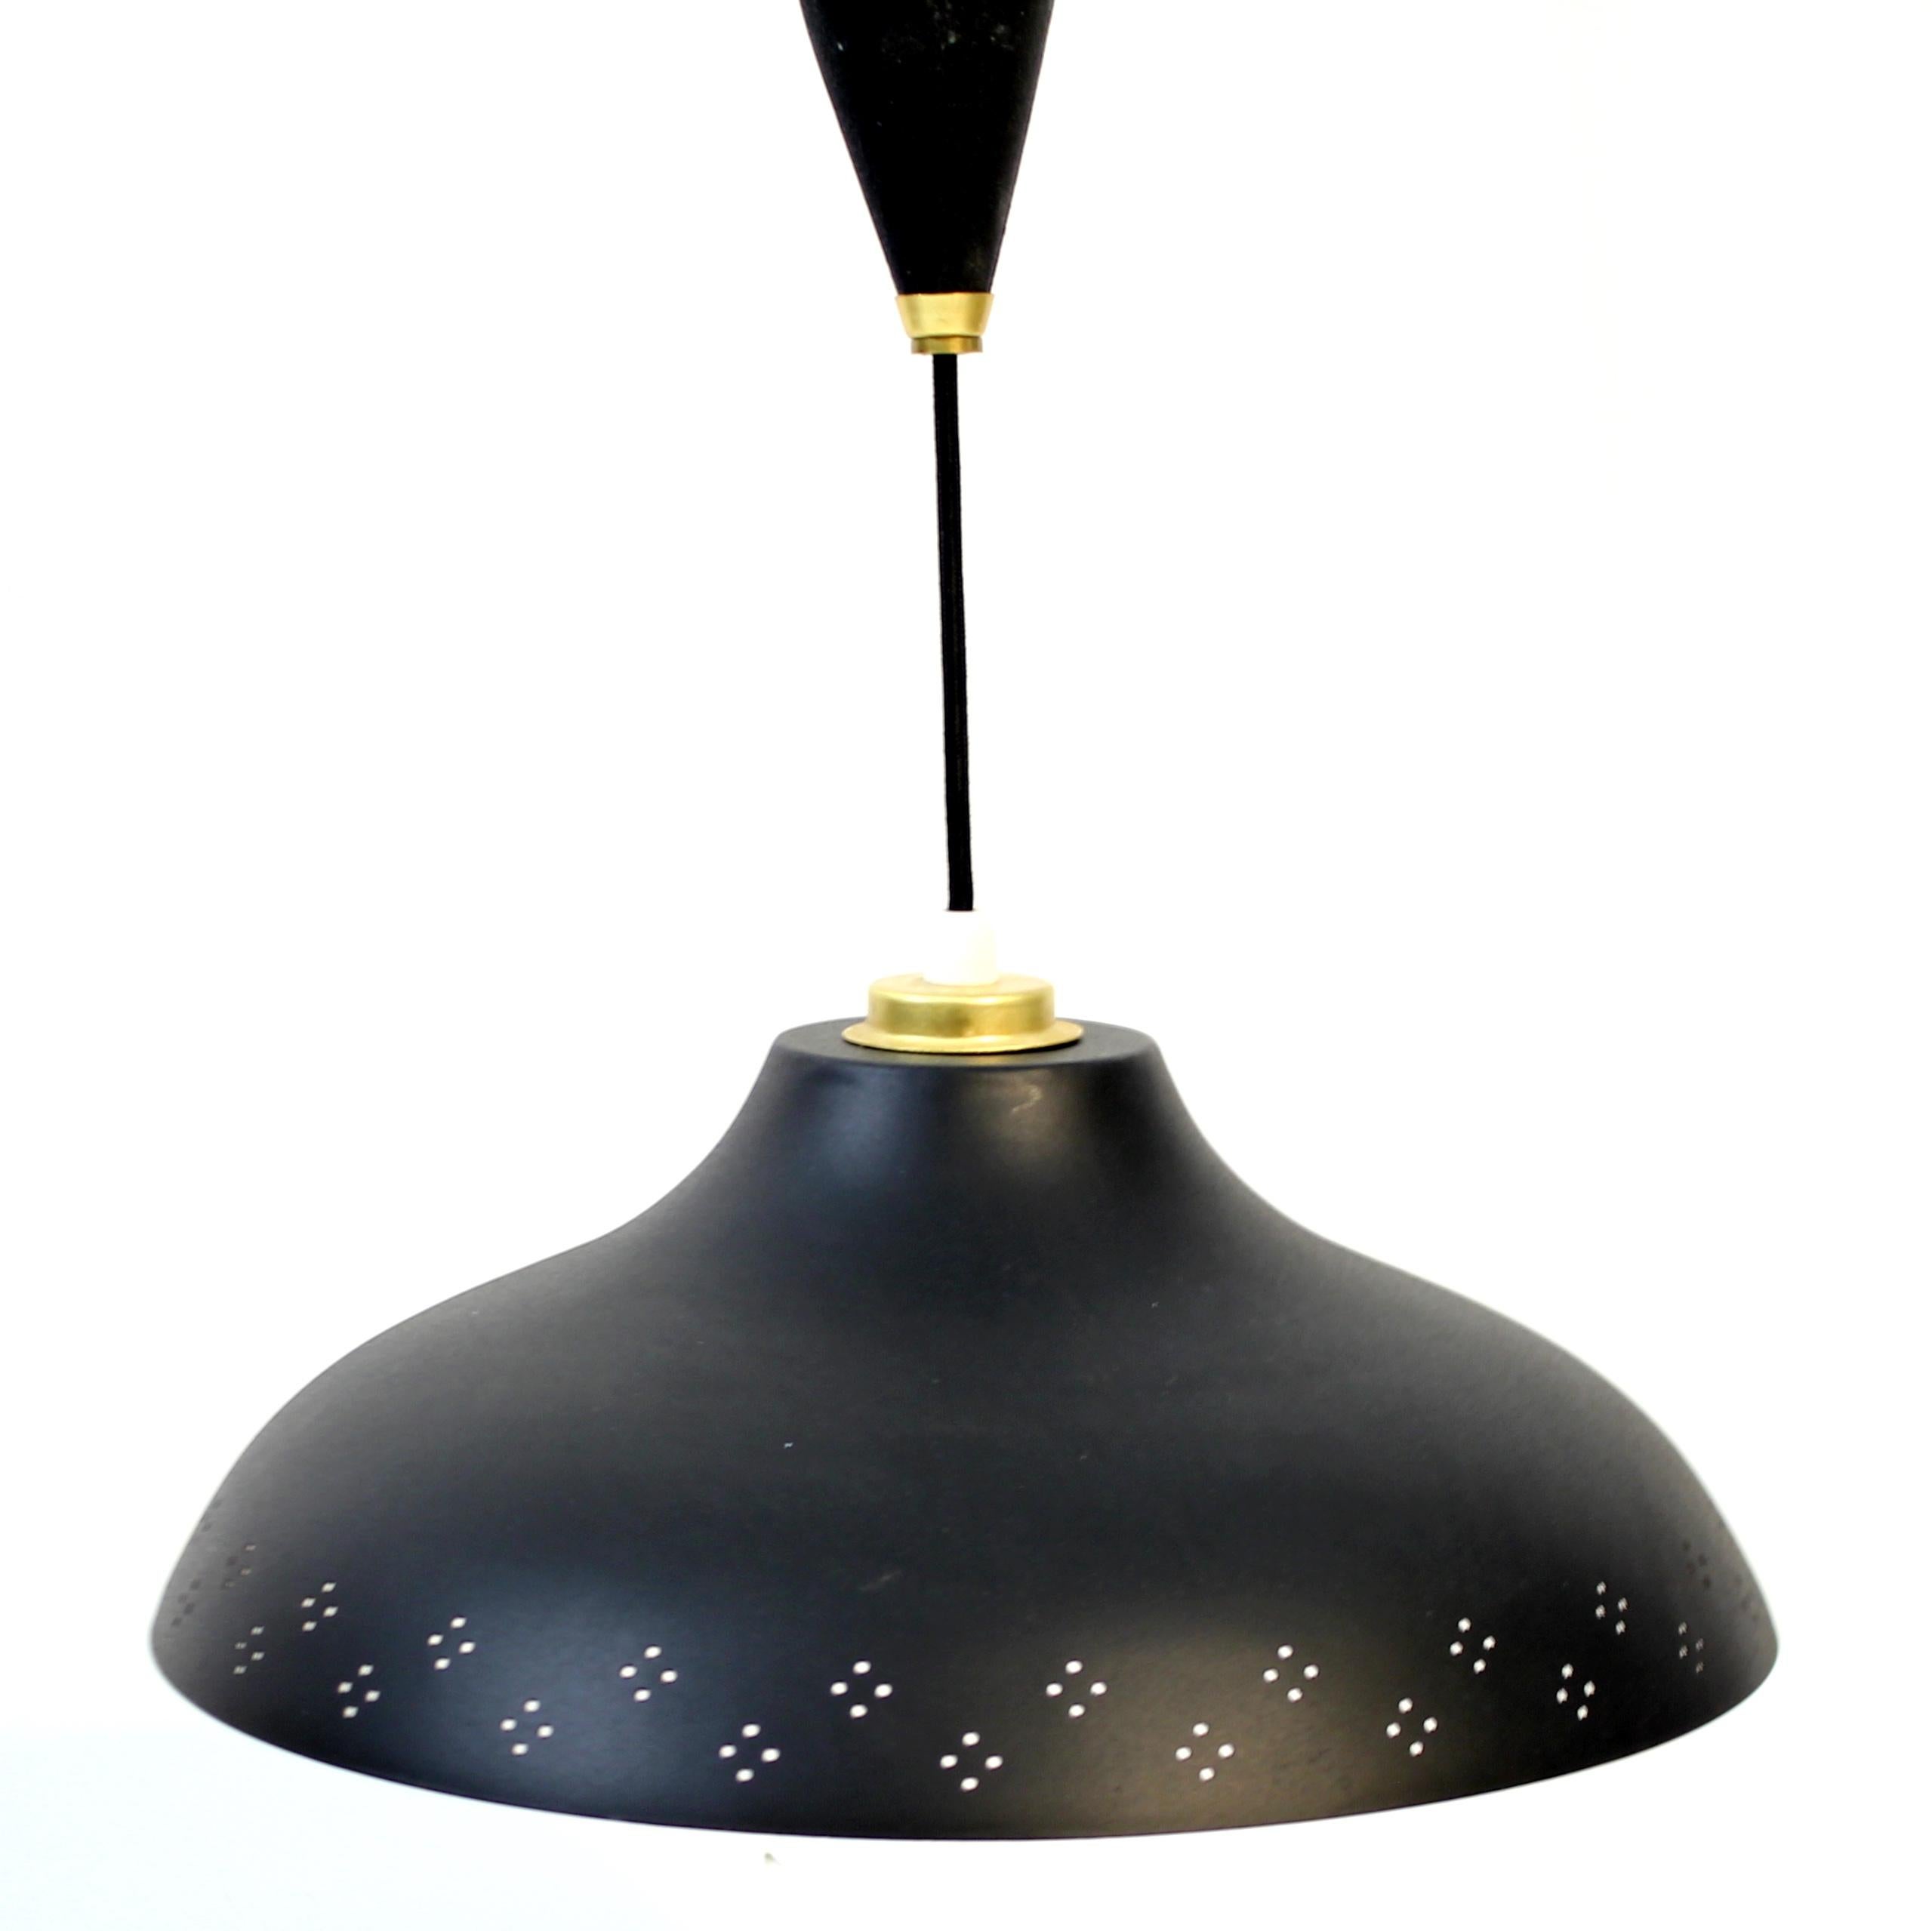 Black ceiling lamp designed by Bertil Brisborg, who for a long time was the head of the lighting department at Nordsika Kompaniet, and produced in the 1950s. The model is height adjustable between 92-139 cm and are made of metal with all new wiring